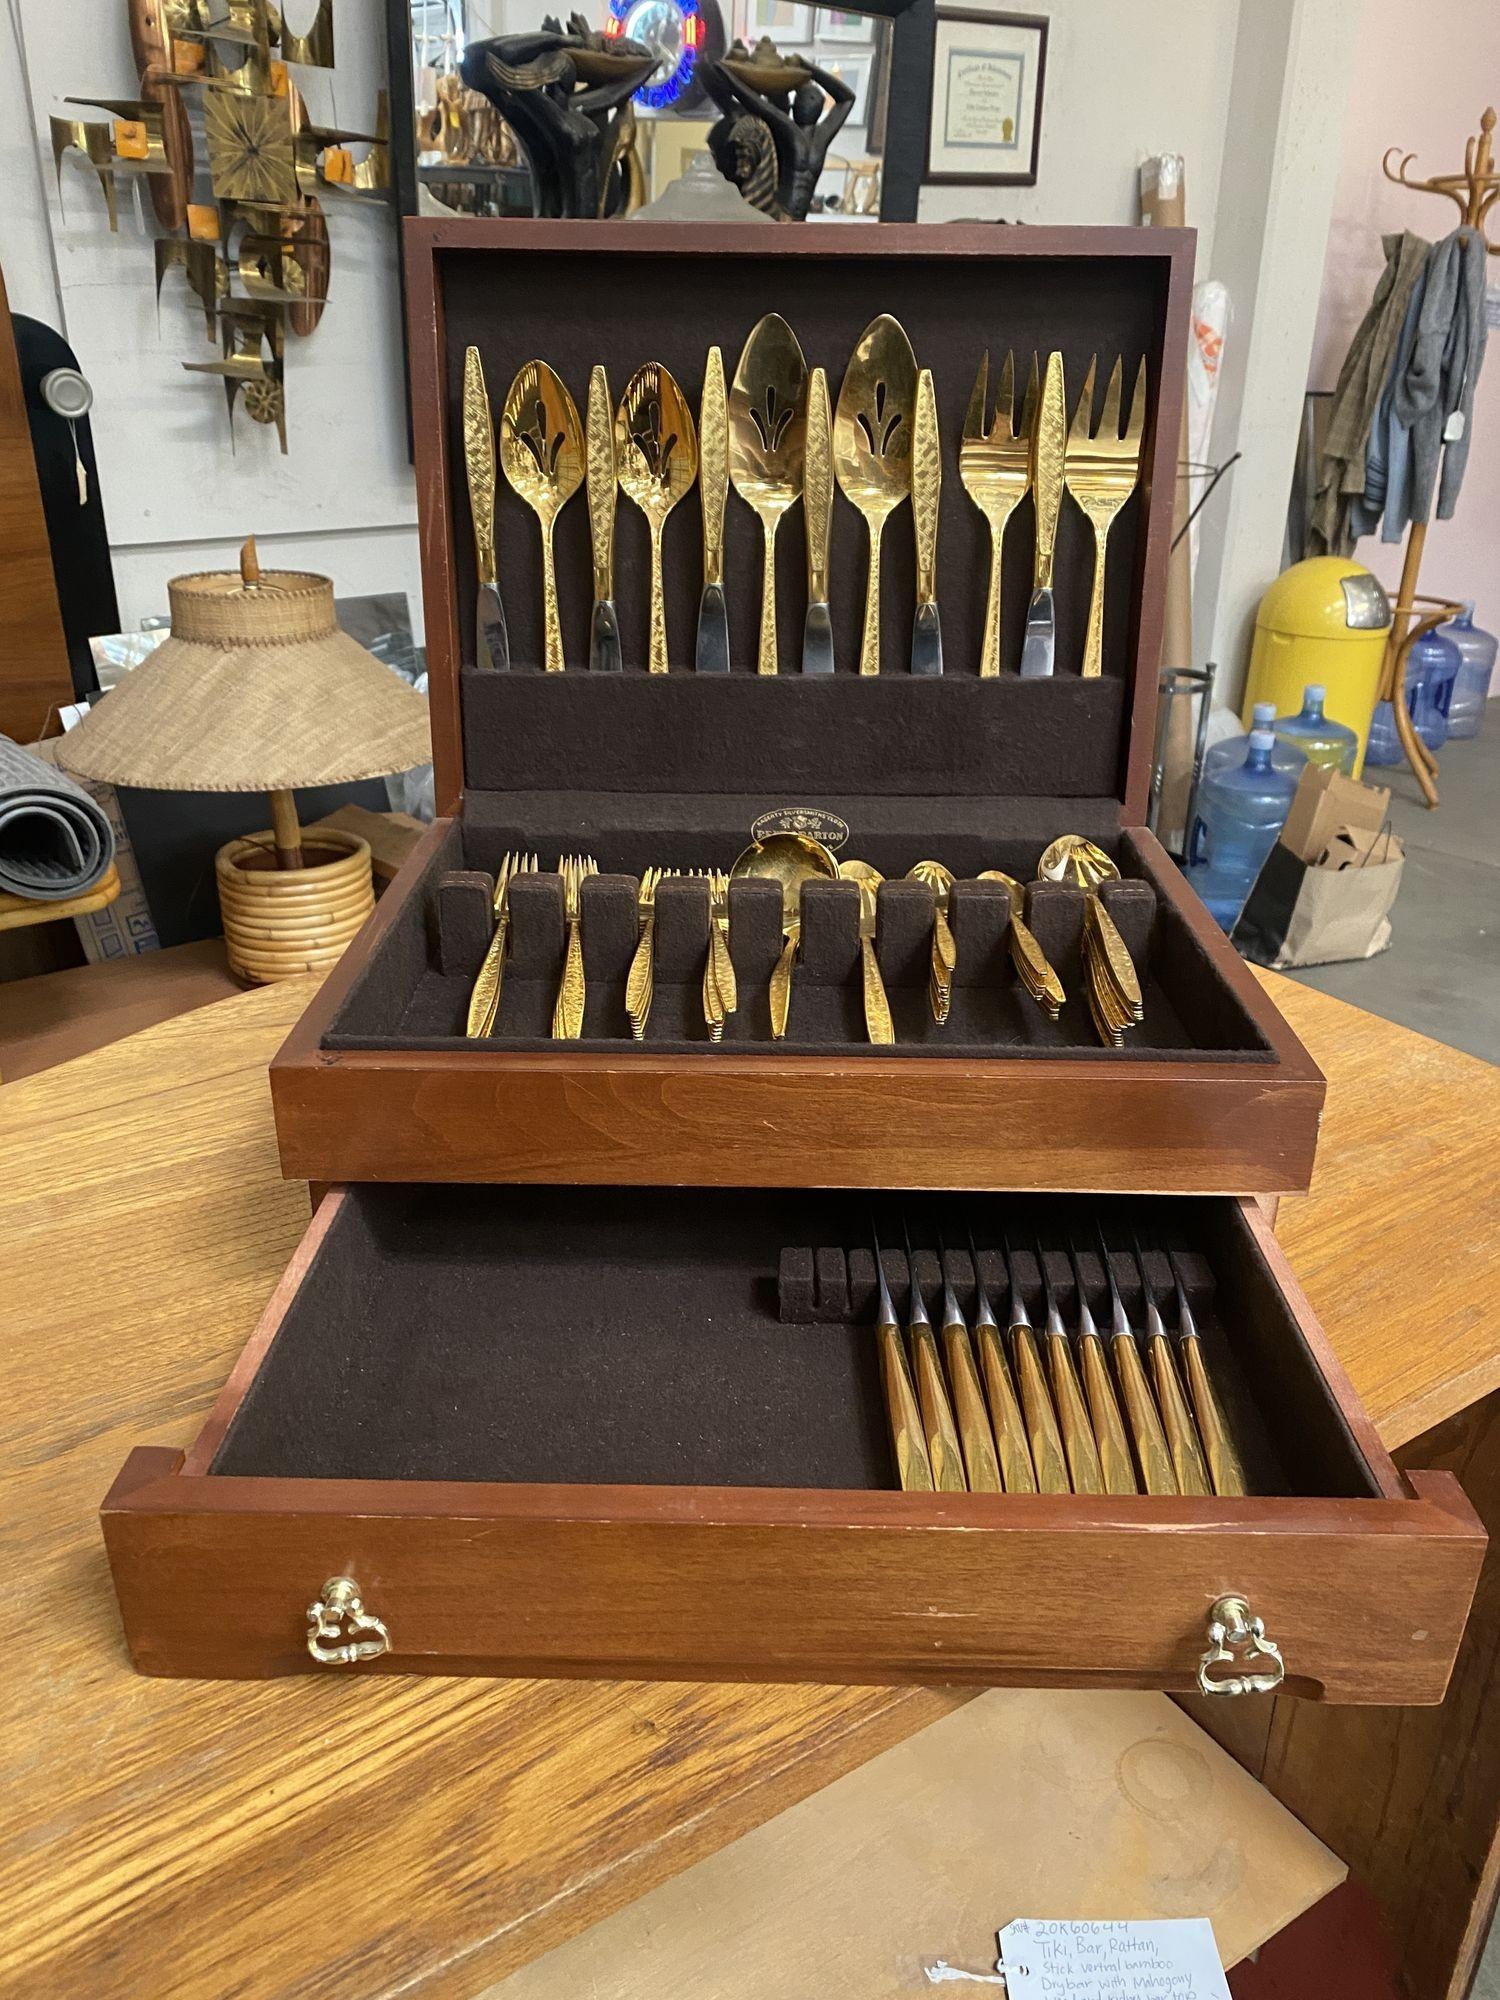 Often called America's most glorious gold-plated flatware pattern, Francis by Reed and Barton is a true work of art. This 92-piece set features a geometric shape with each piece's central decoration featuring a beautiful Mid-century modernist